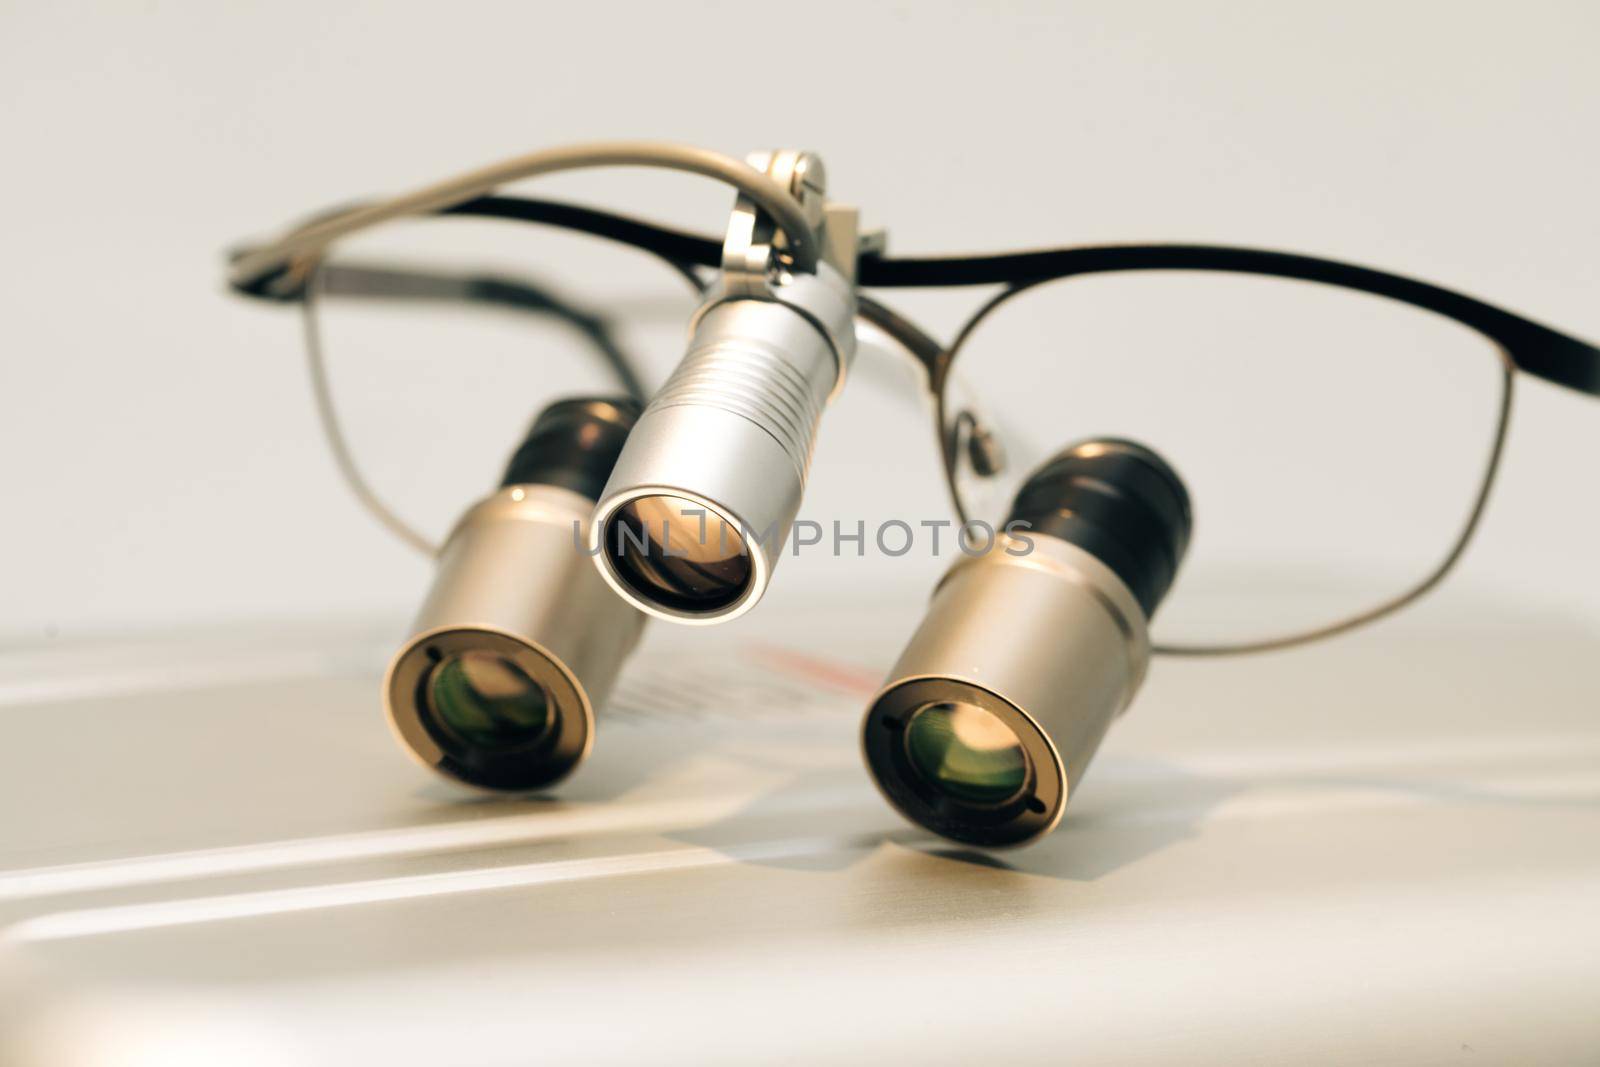 Spectacles magnifying binocular for dental surgery. Binoculars dentistry on the table. Orthodontist binocular. Dental and teethcare care tools.